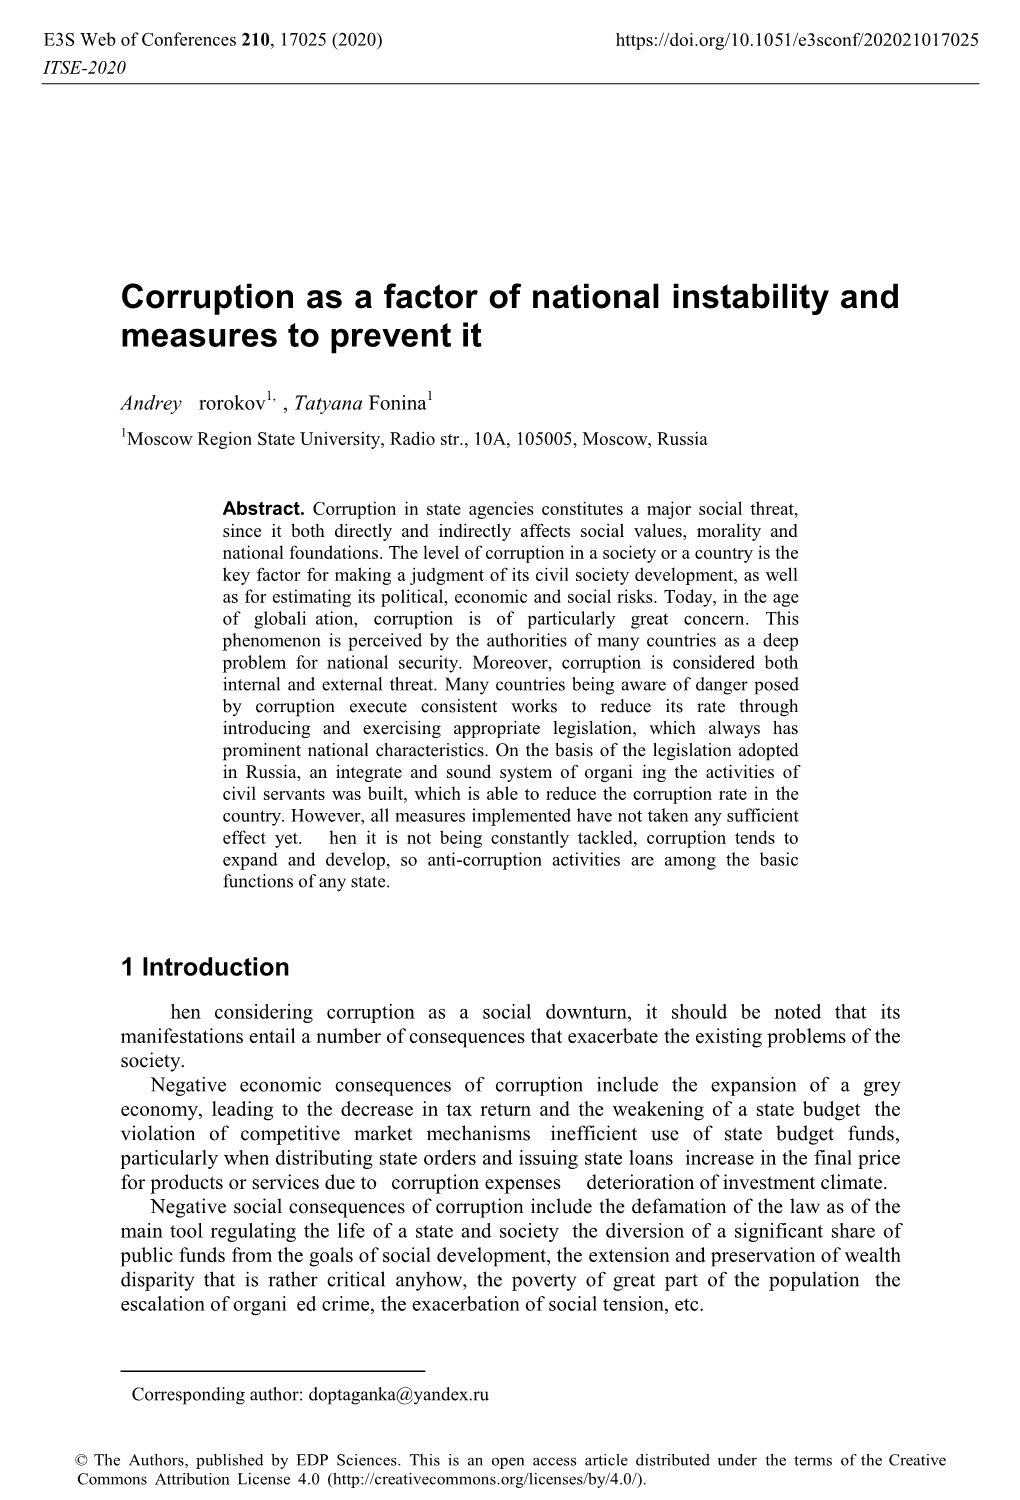 Corruption As a Factor of National Instability and Measures to Prevent It